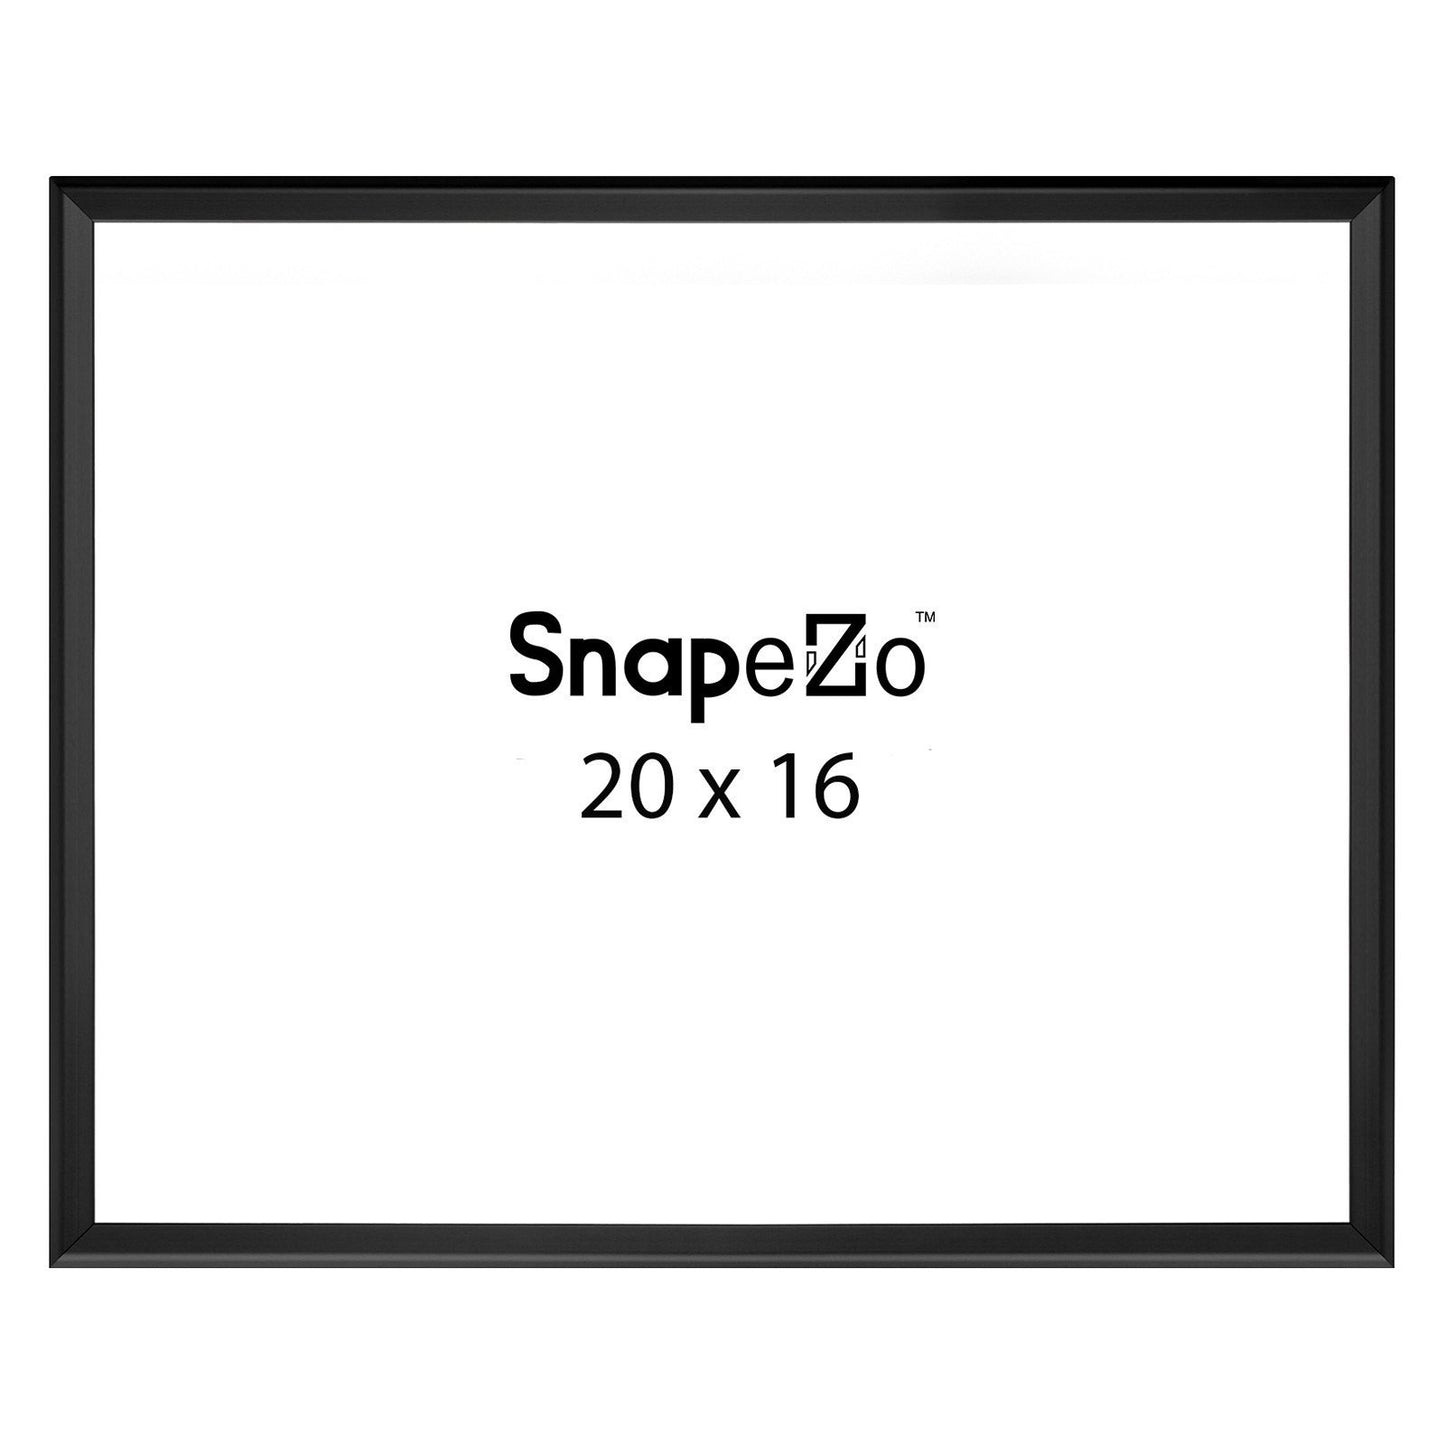 Load image into Gallery viewer, 16x20 Light Wood SnapeZo® Snap Frame - 1 Inch Profile
